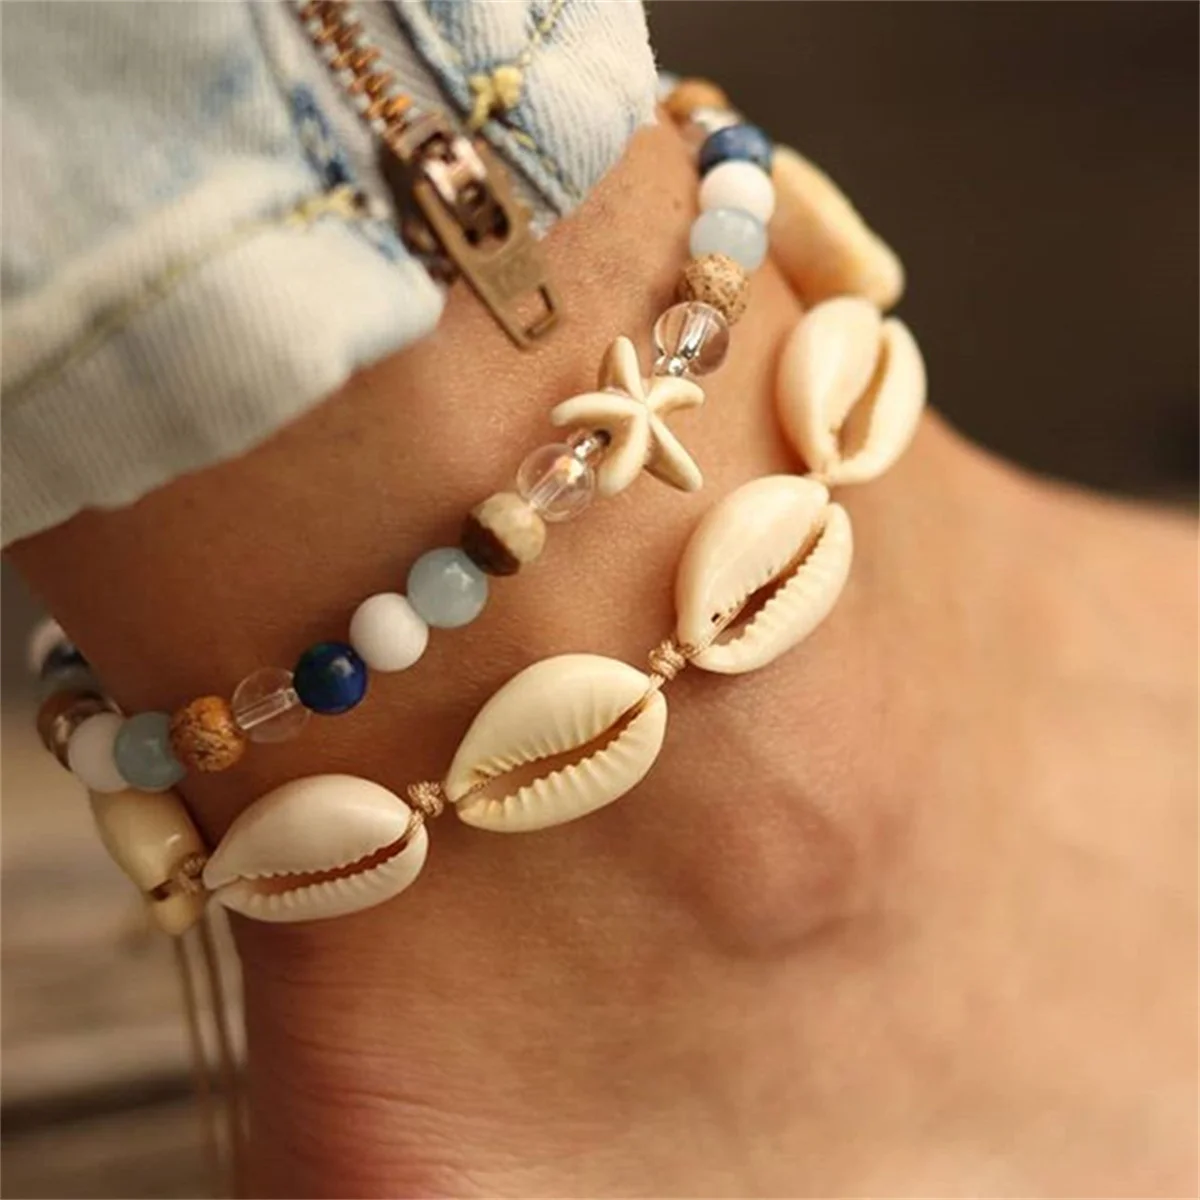 

Boho Shell Rope Chain Anklets For Women Crystal Beads Starfish Charm Anklet Beach Barefoot Ankle Bracelet Leg Chain Foot Jewelry